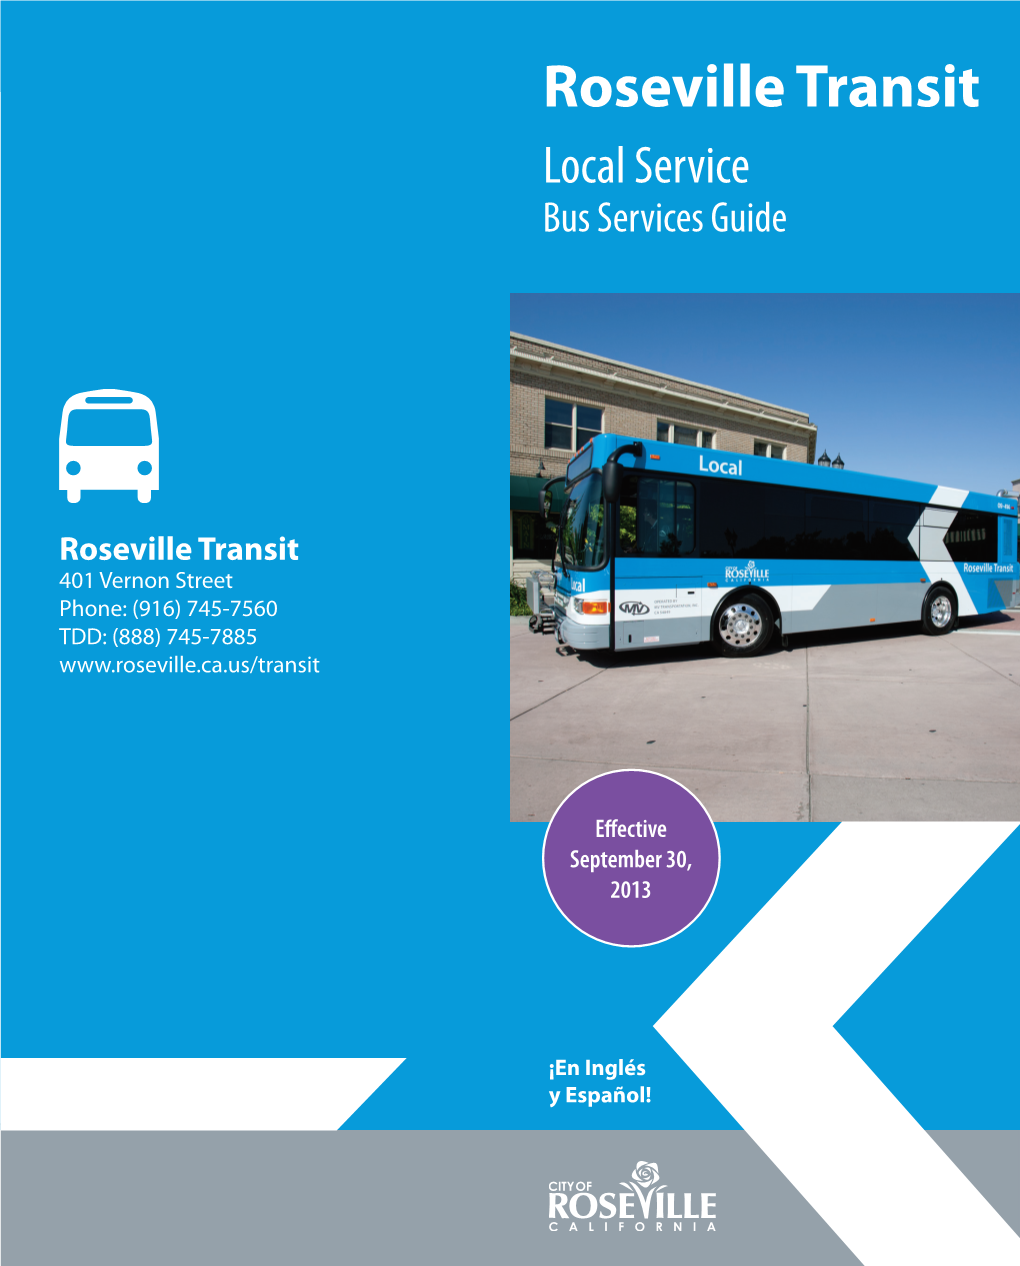 Bus Services Guide